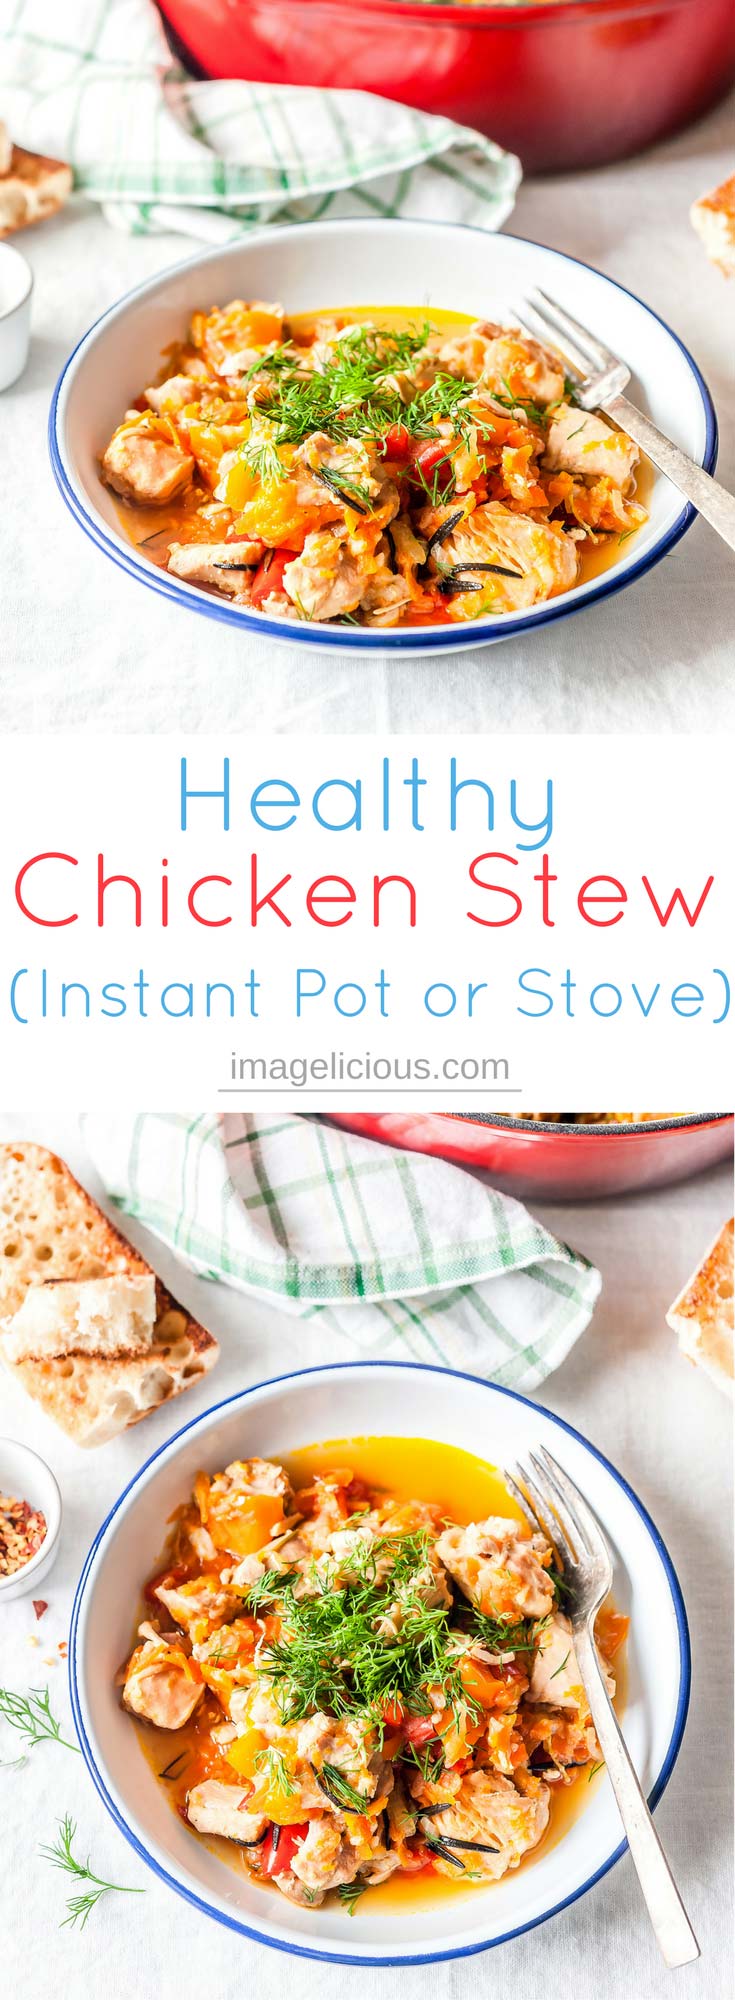 Healthy Chicken Stew is delicious and easy to make. It has only 5 ingredients and is loaded with vegetables. Made on the stove top or in Instant Pot, it's a perfect meal to serve over rice, quinoa, or noodles | imagelicious.com #instantpot #chicken #stew #healthy #glutenfree #pressurecooker